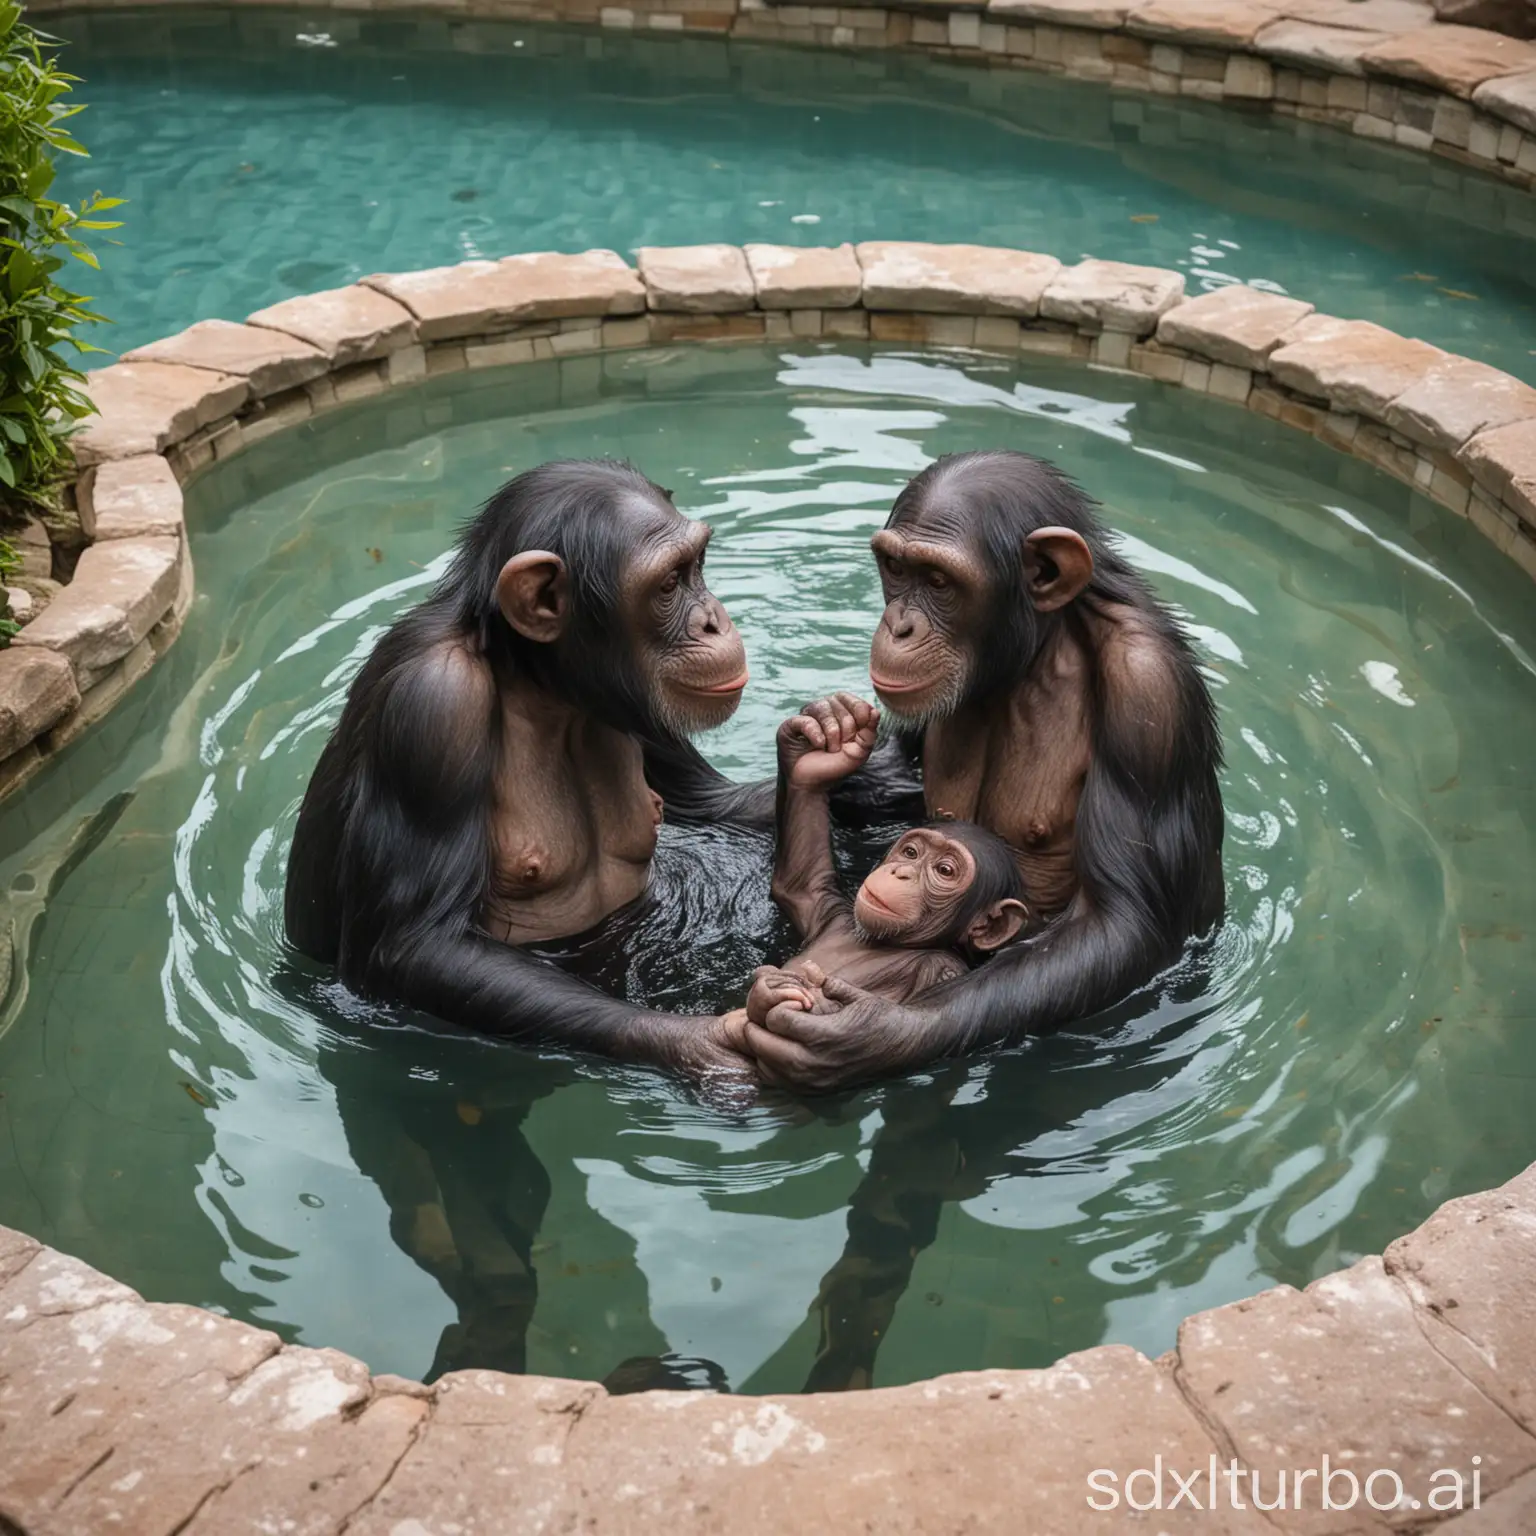 Chimpanzees-Playing-with-Cub-in-Spa-Pool